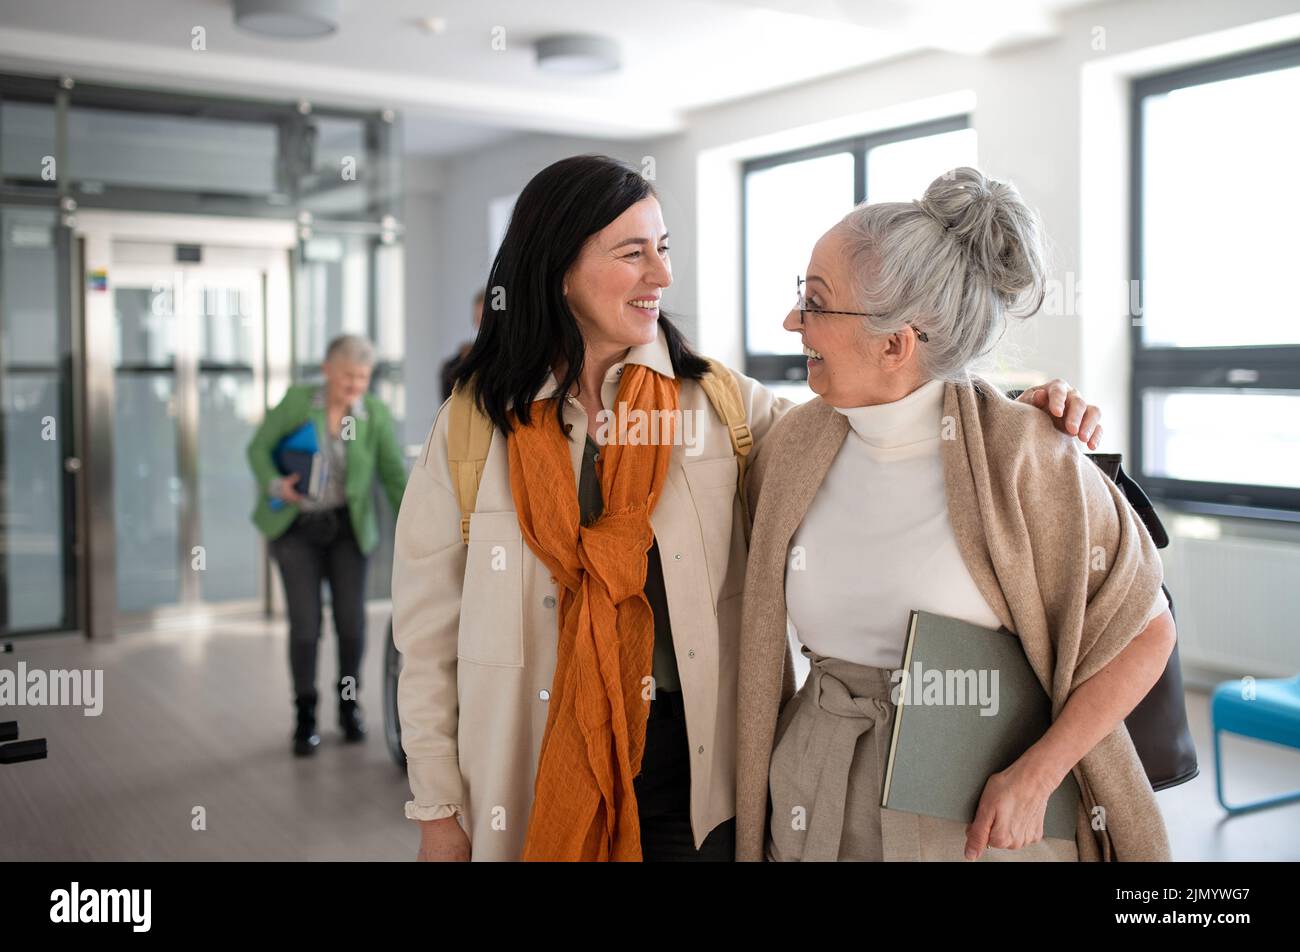 Happy mature woman student with book discussing with teacher in corridor in university. Stock Photo